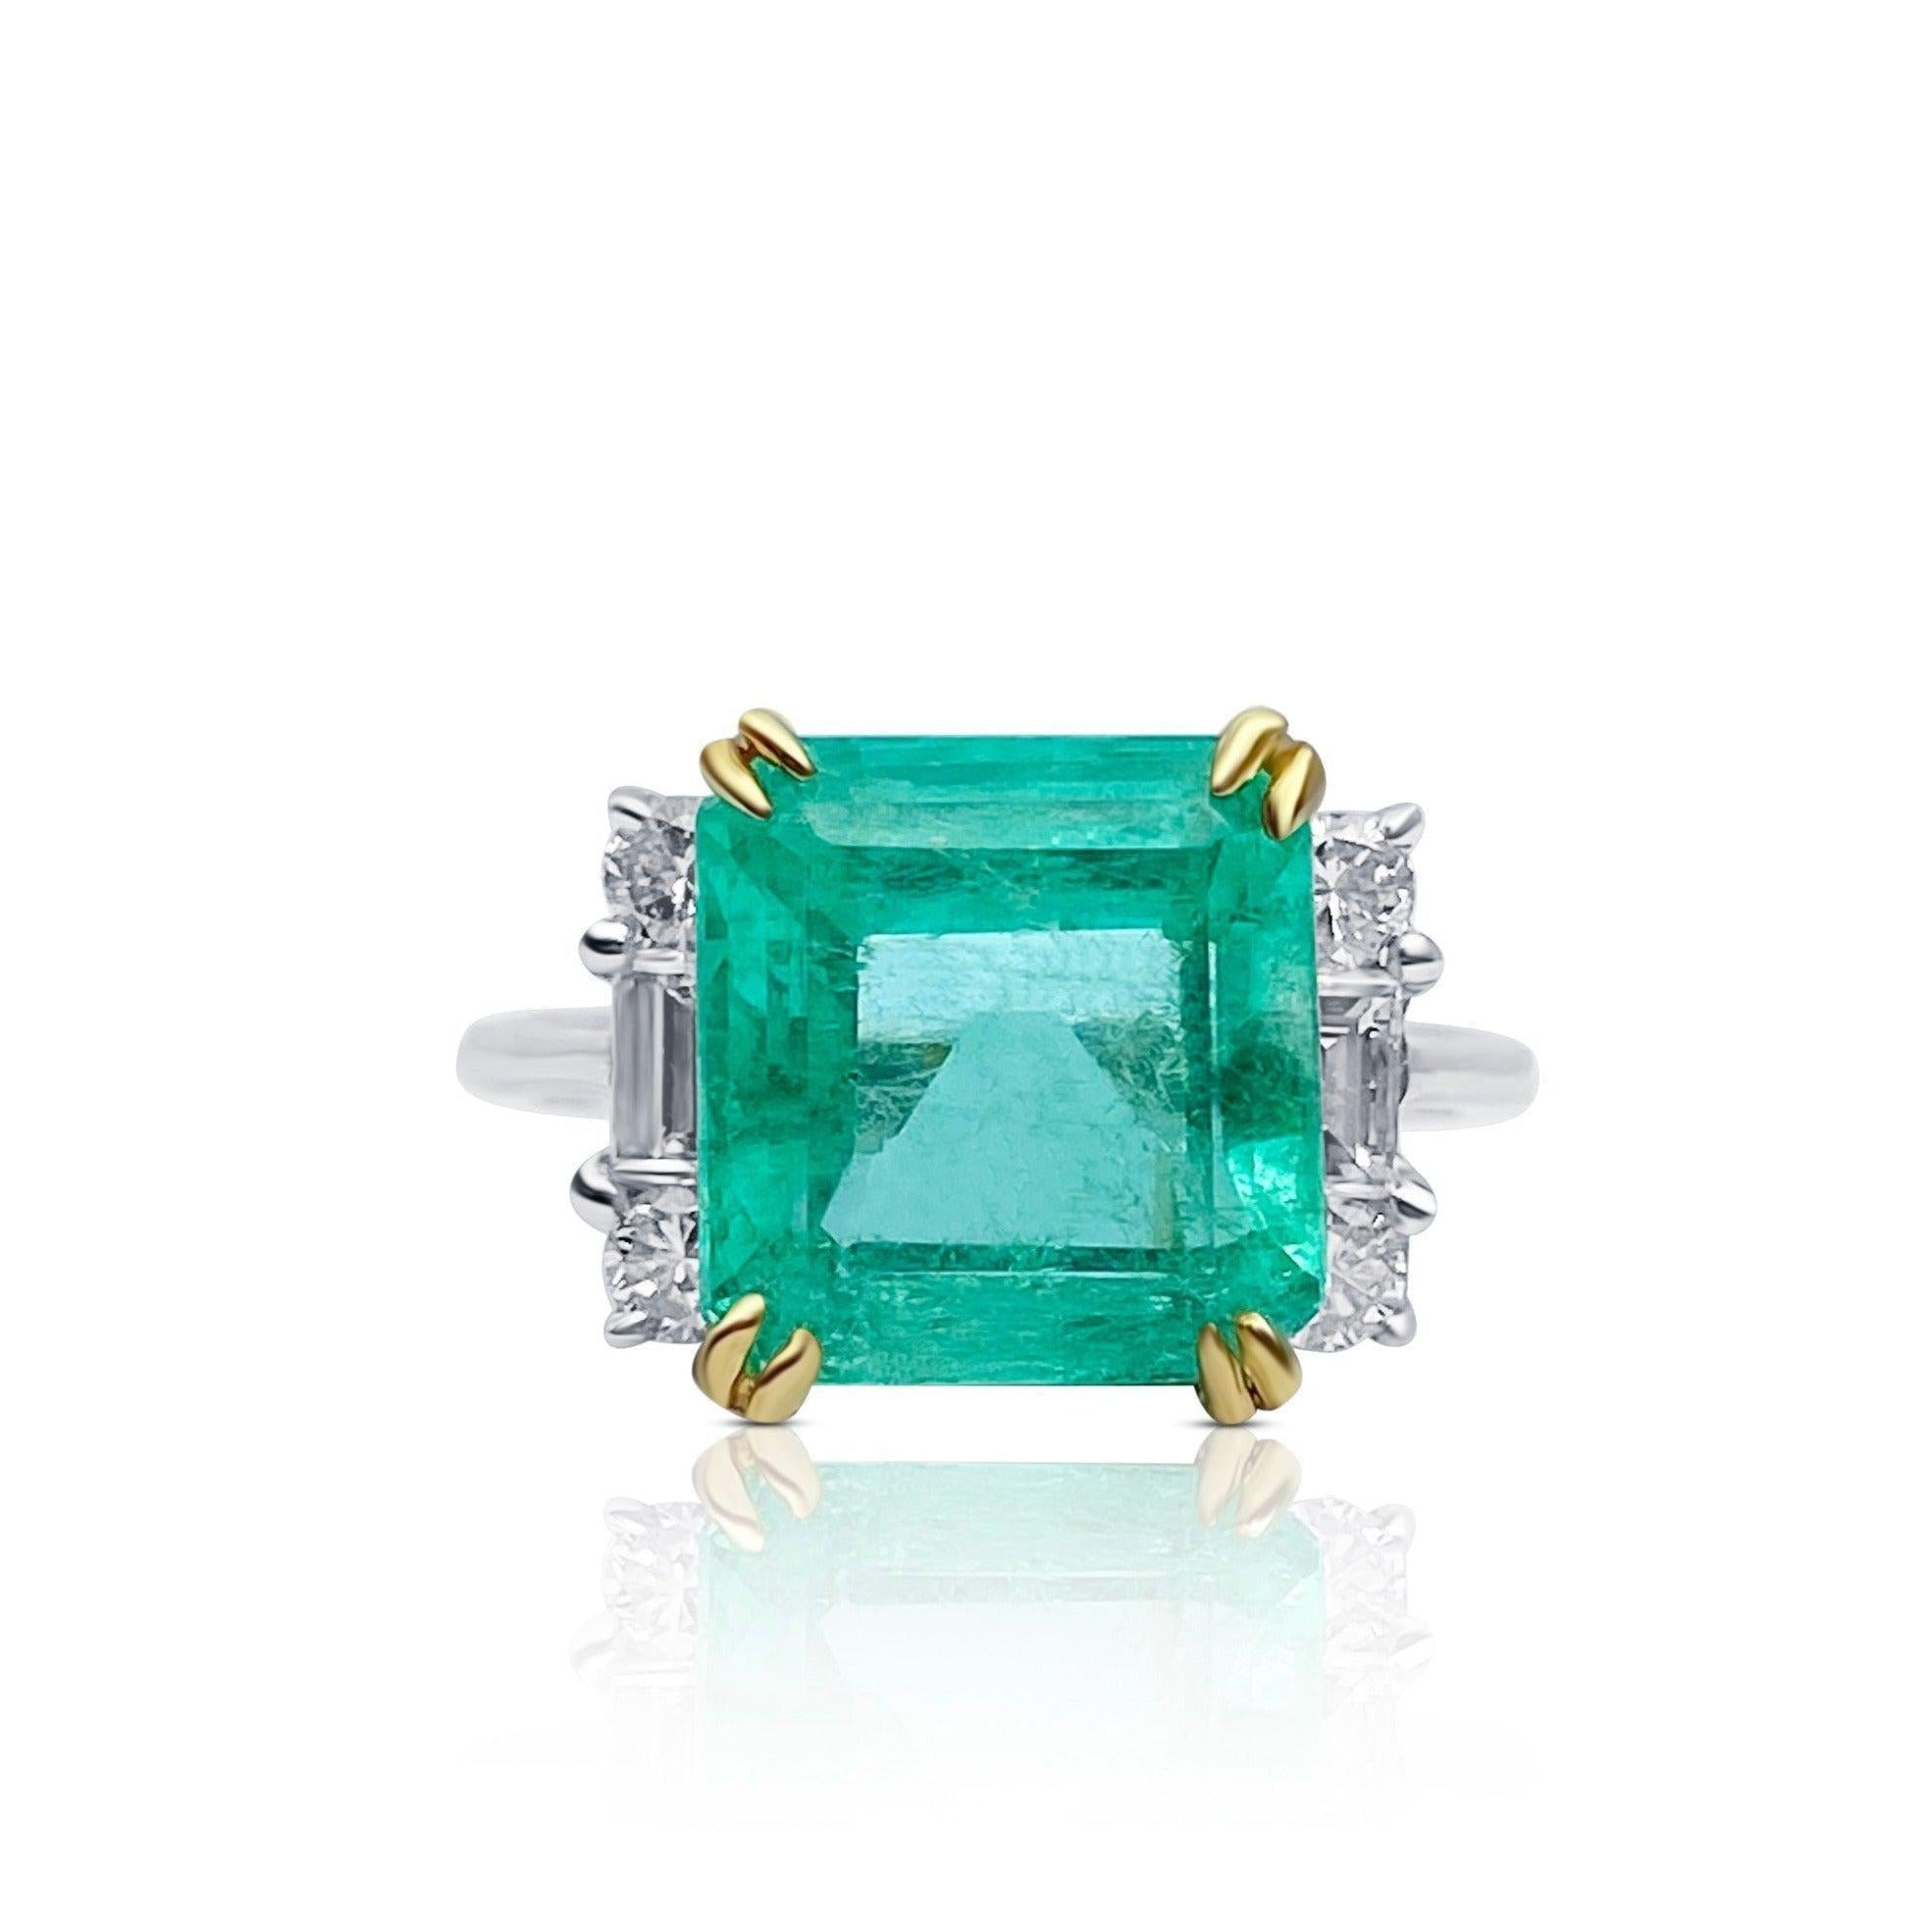 4.65 Carat Emerald Cut Colombian Emerald Ring in Thin 18k White and Yellow Gold Ring - ASSAY